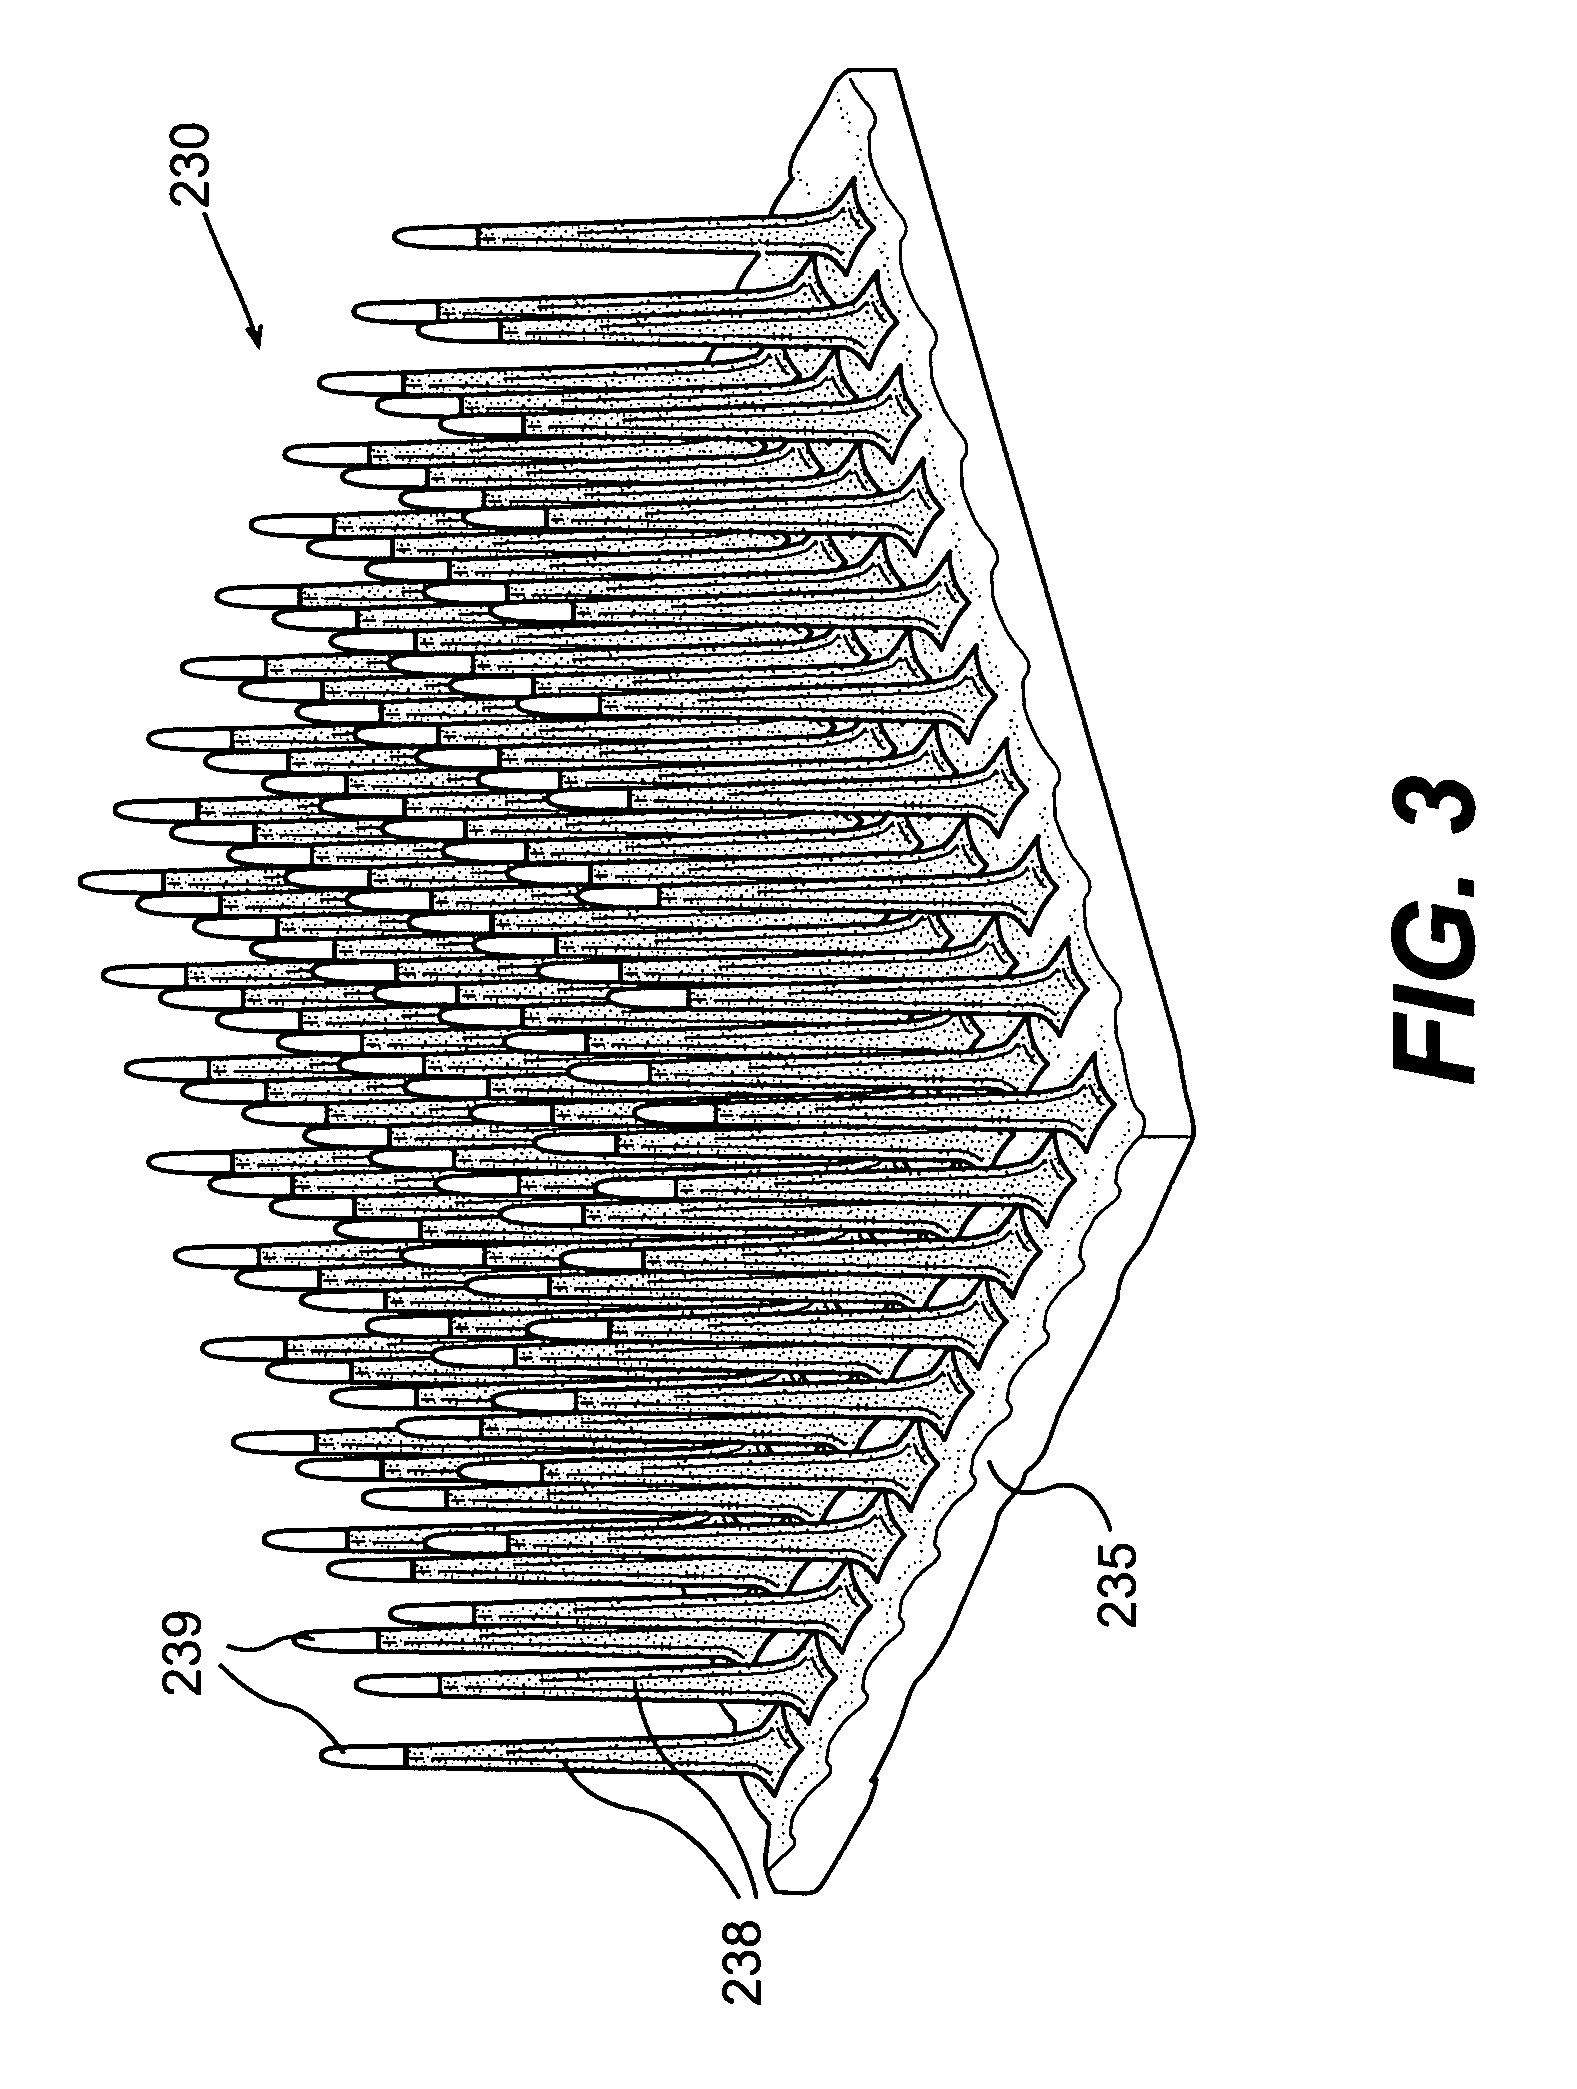 Neurological event monitoring and therapy systems and related methods